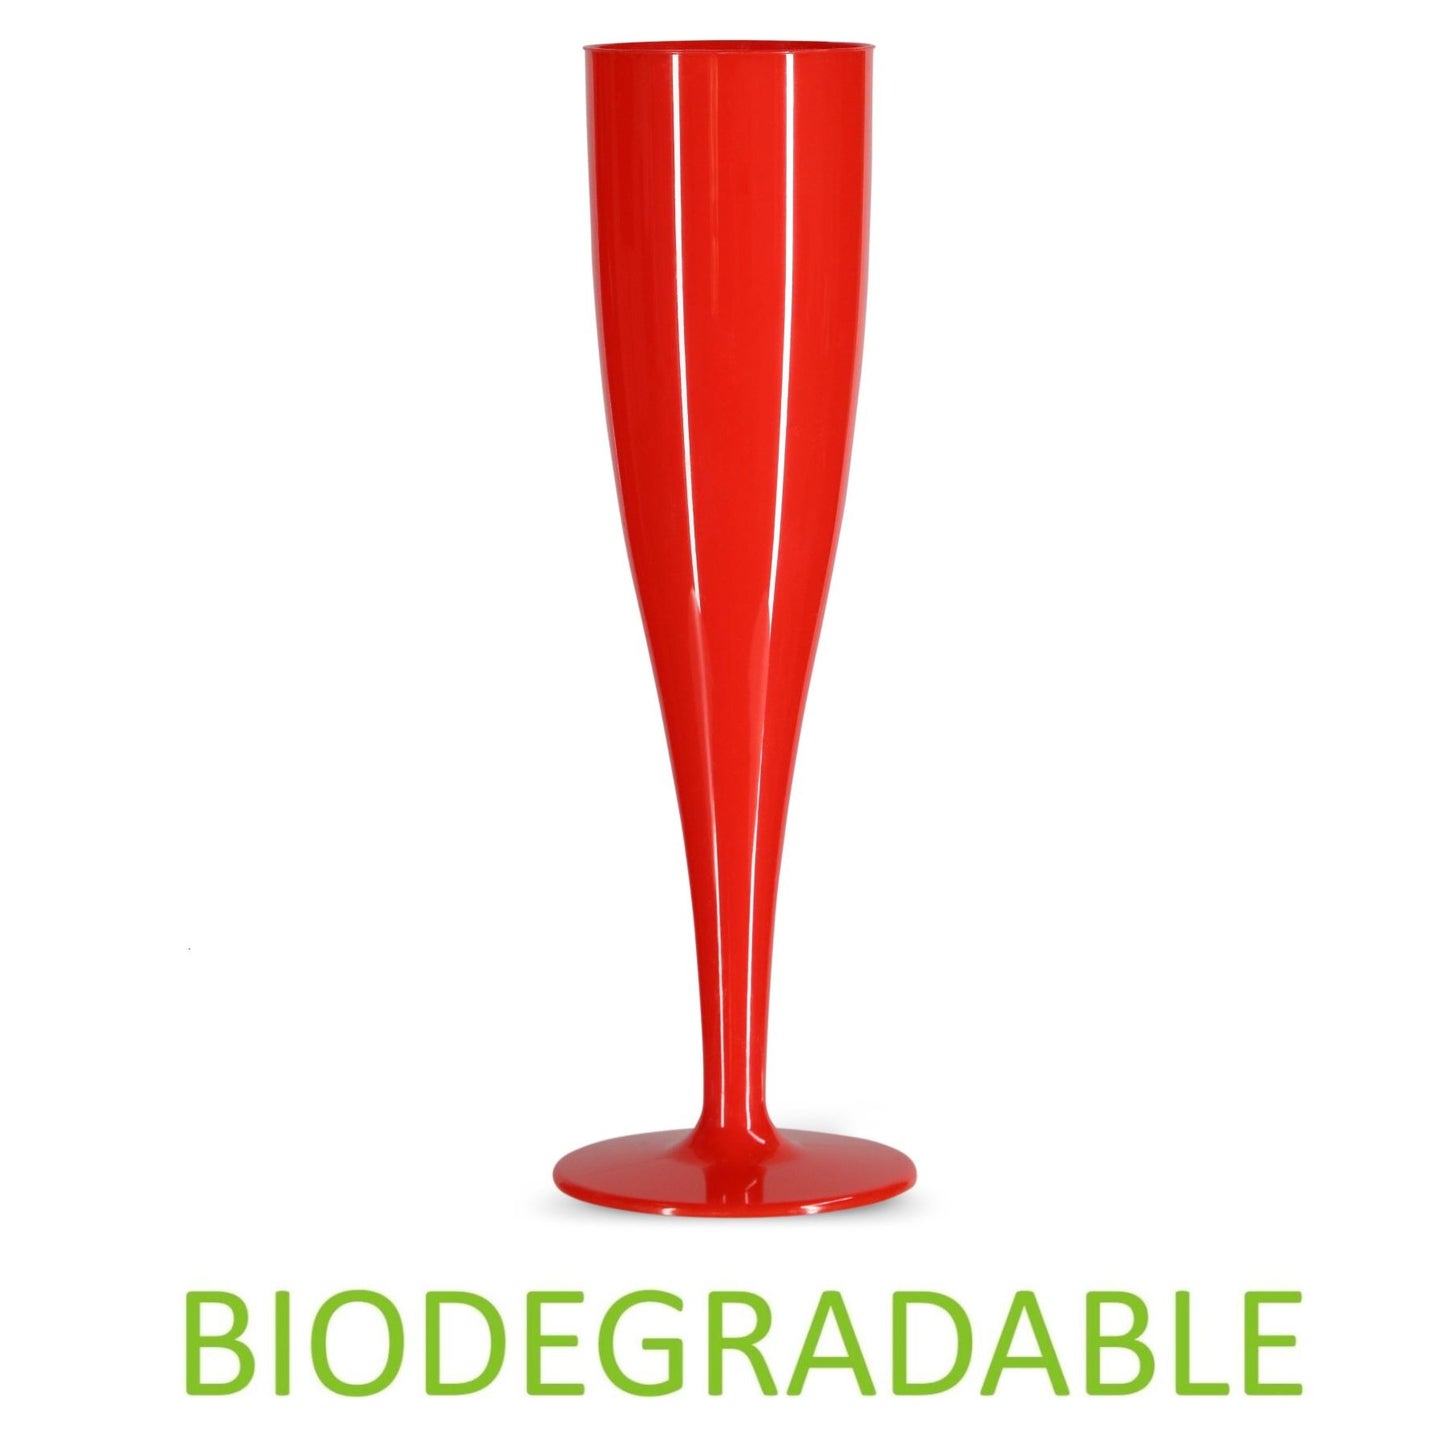 10 x Red Prosecco Flutes – Biodegradable Material in glossy Colour 1-Piece Champagne Glass (Pack of 10 Glasses) Halloween, Parties, BBQ-5056020187325-PCUP-CHAMP-BIO-R-Product Pro-BBQ, Biodegradable, Champagne Flutes, Champagne Glasses, Flutes, Garden, Picnic, Prosecco Flutes, Prosecco Glasses, Red, Red Champagne Glasses, Red Prosecco Flutes, Wedding